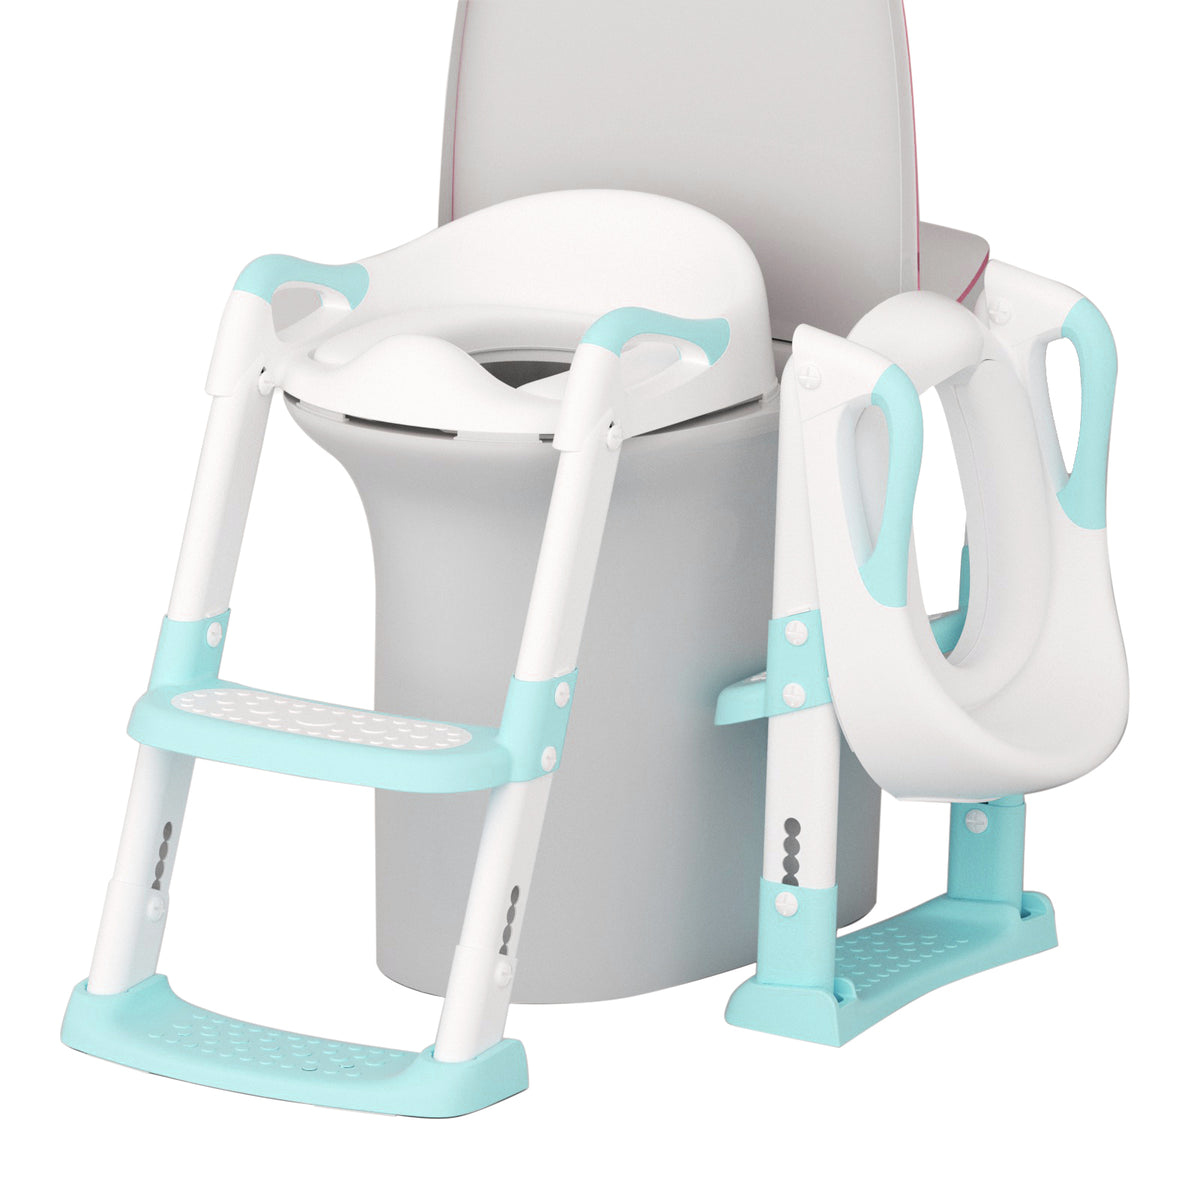 GLAF Toddler Potty Training Seat for Toilet with Ladder in green In Stock USA